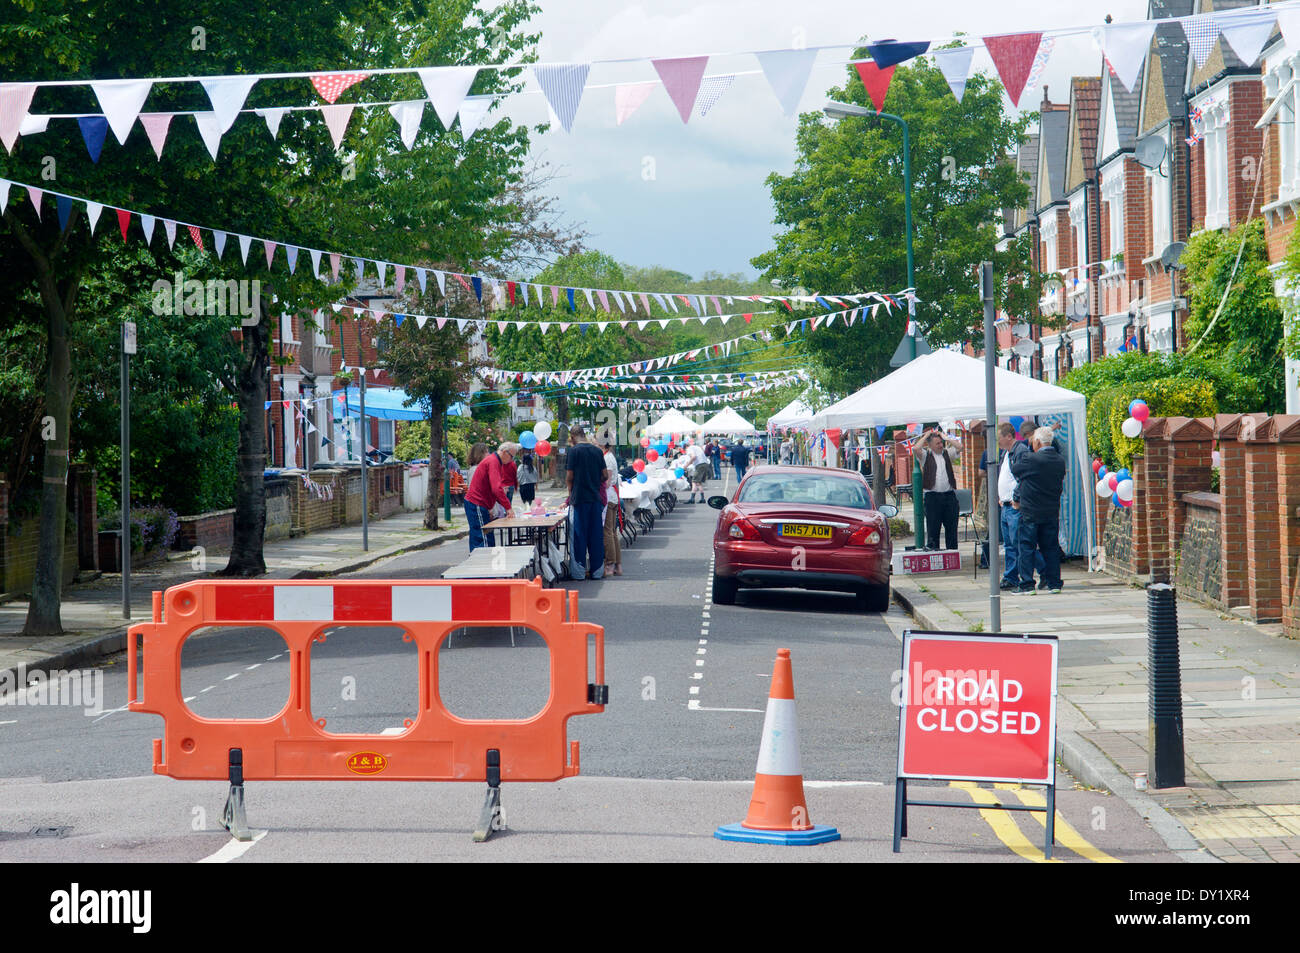 Royalty free stock photo of the preparation of a local street party in the occasion of the Diamond Jubilee Stock Photo